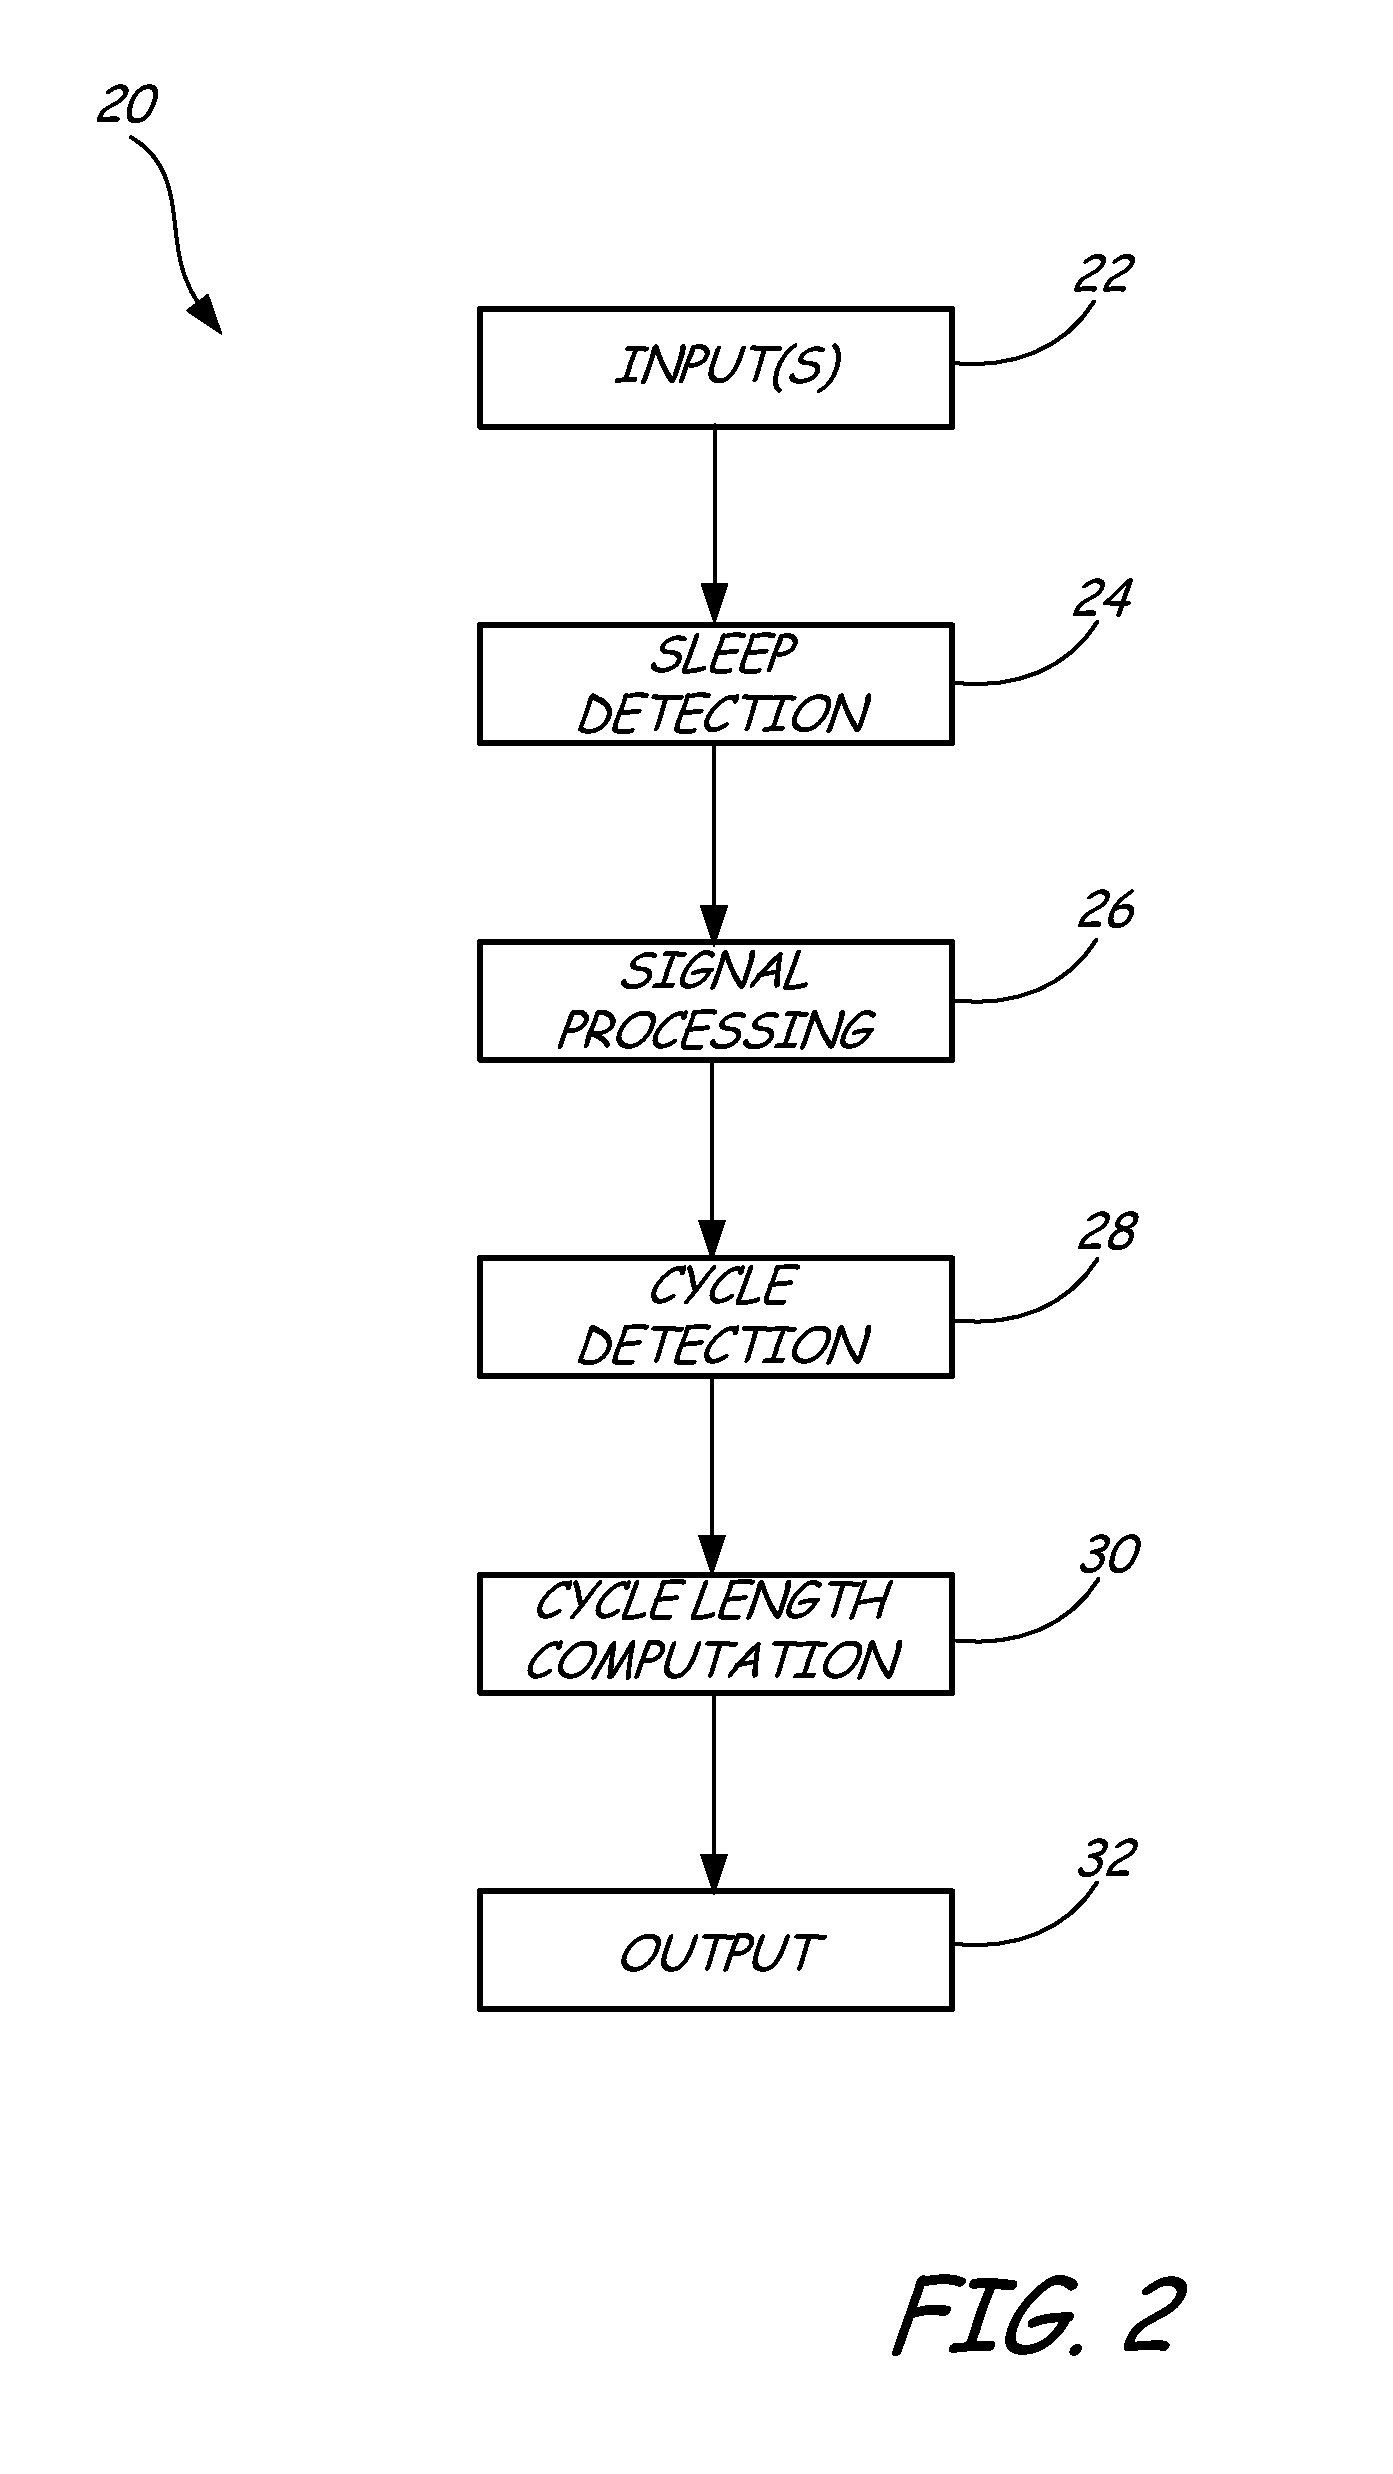 System and method for monitoring periodic breathing associated with heart failure